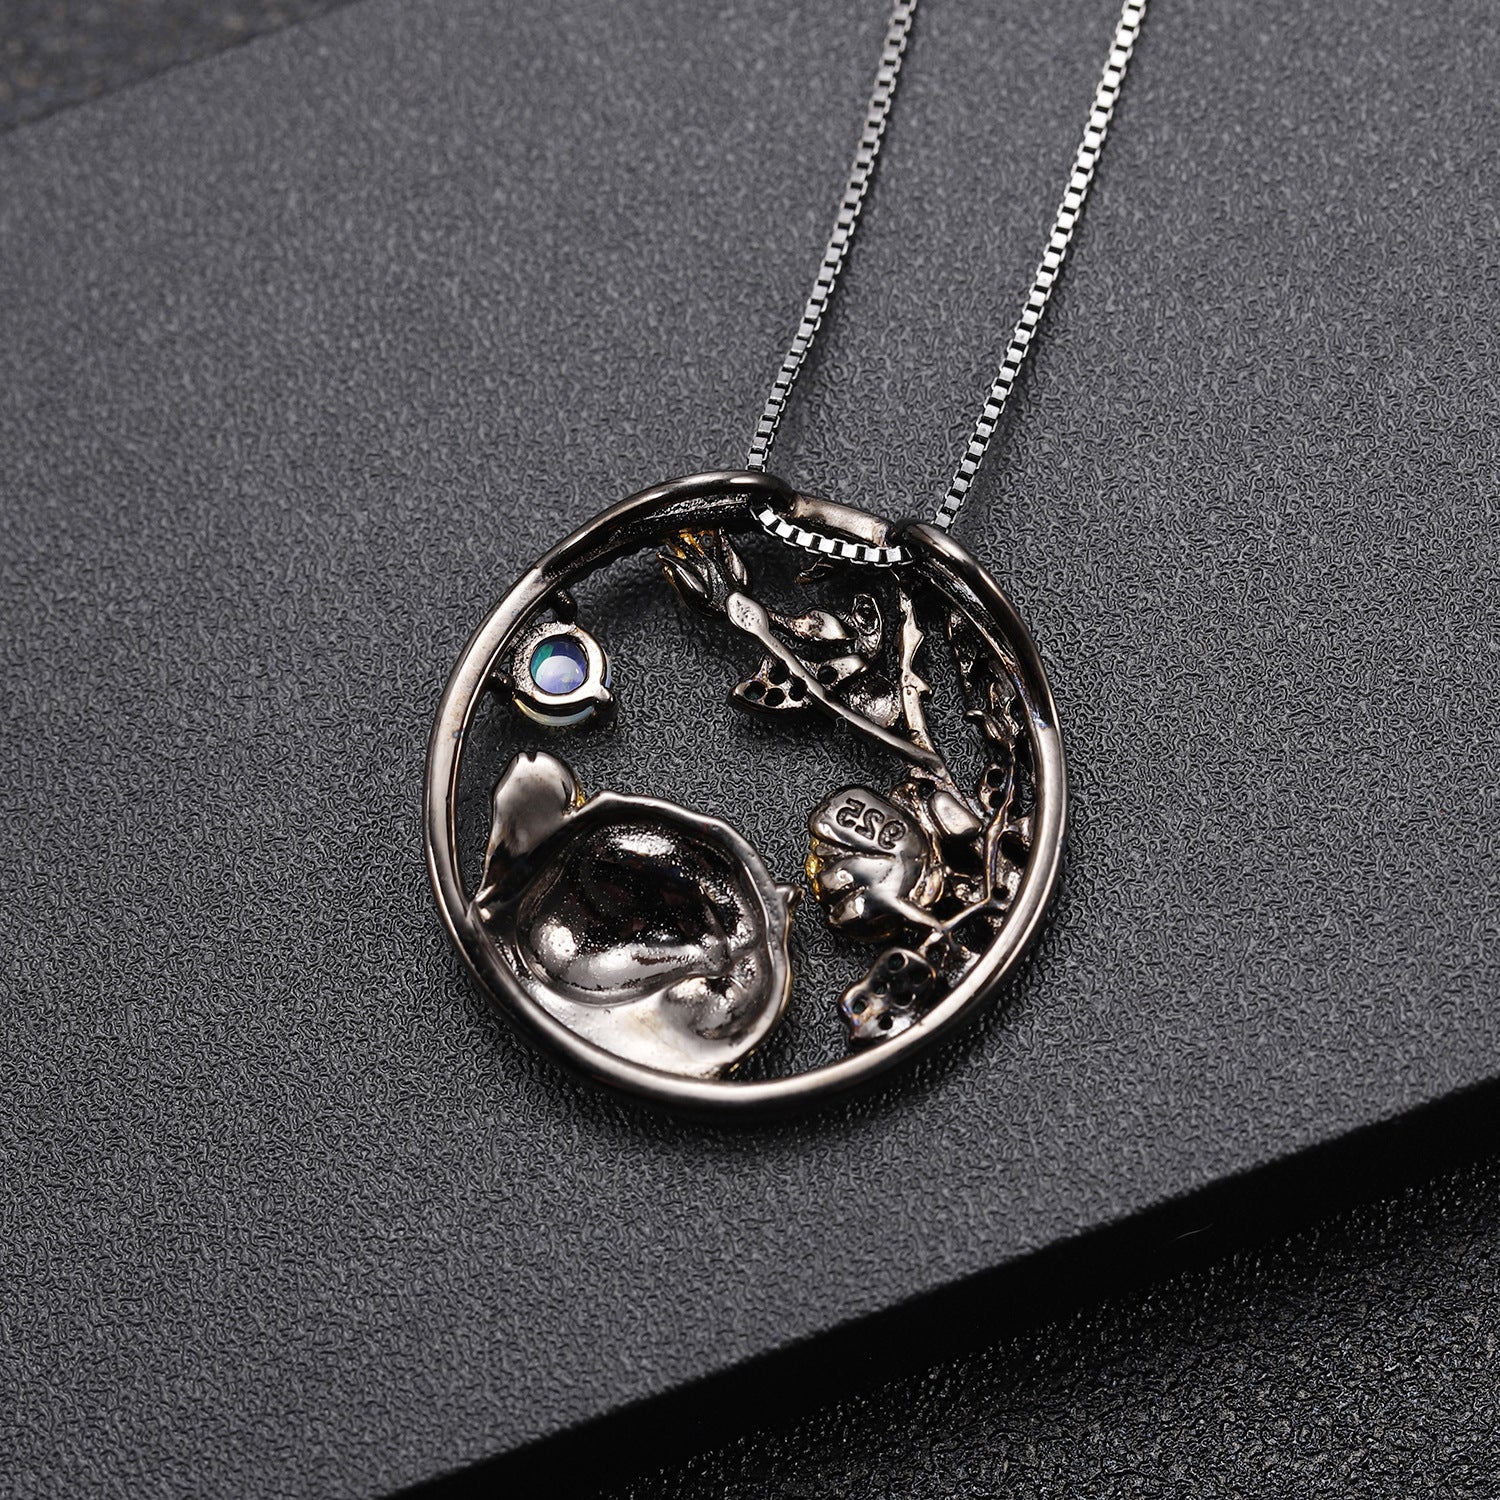 Animal Element Design Zodiac Series Inlaid Natural Colourful Gemstone Tiger Pendant Silver Necklace for Women